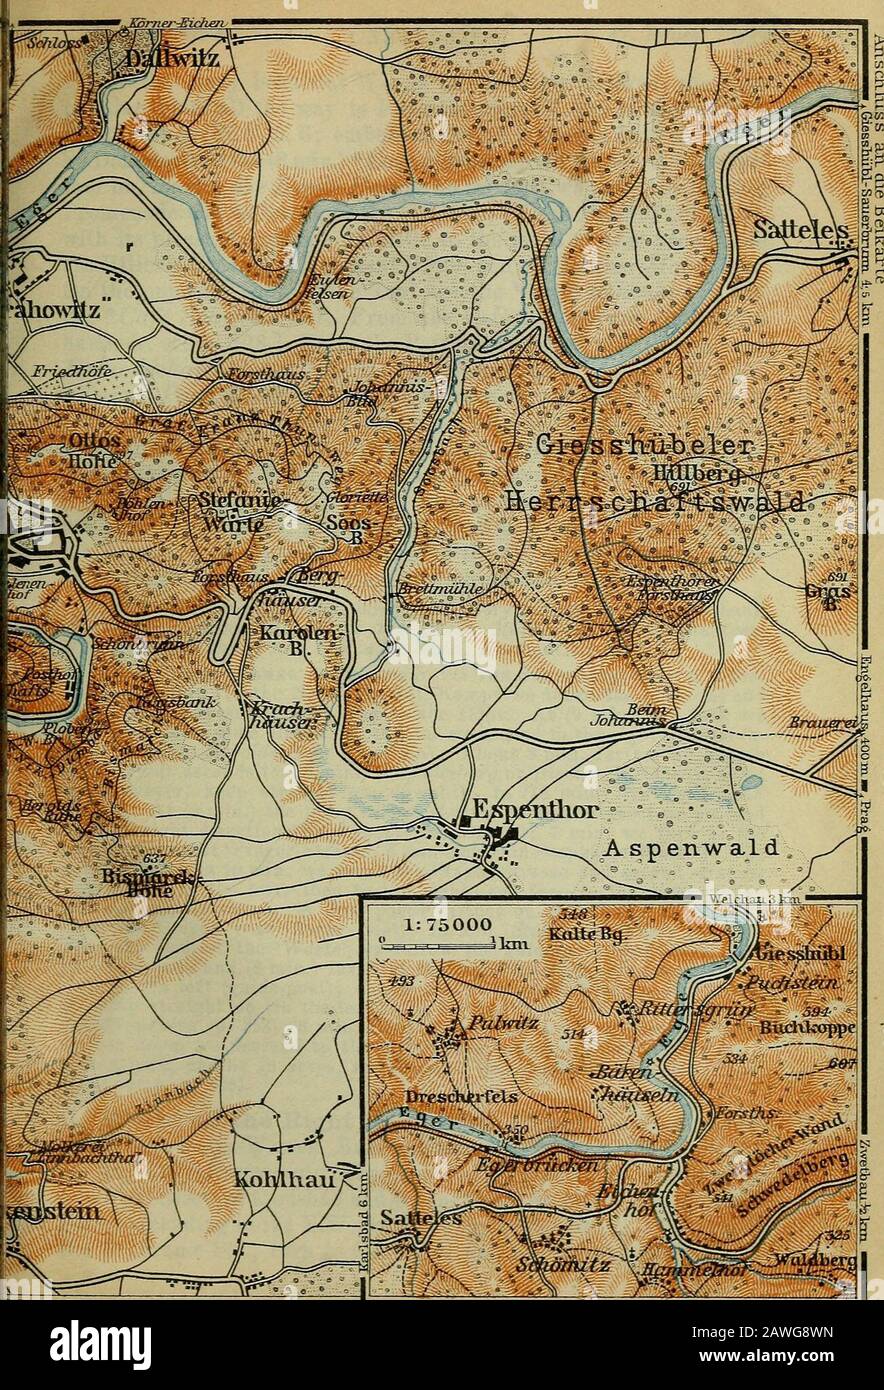 Austria-Hungary : with excursions to Cetinje, Belgrade, and Bucharest : handbook for travellers . ^&gt;,Kt^-^rr =aE:agLMfl.e Wagner ?e-DebesIeipzig Pirkenhammer. CARLSBAD. 47. Route. 327 Of the many beautiful Walks (all of them marked) the mostpopular (level all the way to Pirkenhammer; 1 hr.) is through theGoethe-Weg (PL C, 5, 6; embellished with a marble bust of Goetheby Donndorf) to the (8 min.) * Cafe Sanssouci (PL D, 6). A little far-ther on, leaving the Karls-Briiclce on the left, we enter the PosthofPromenade and follow it to the (10 min.) * Cafe Posthof (PL E, 7),with its pleasant gard Stock Photo